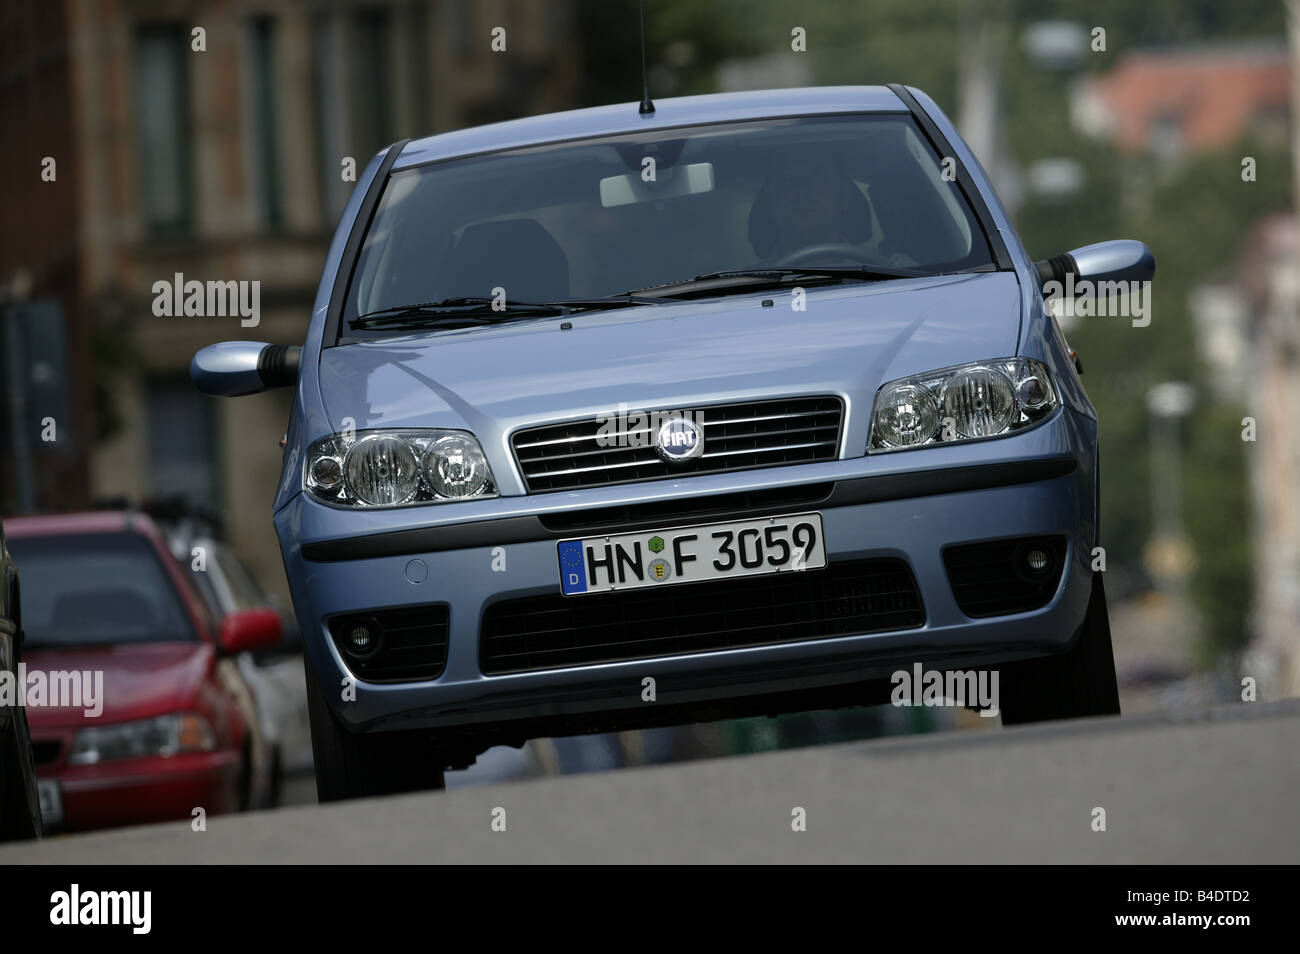 Car, Fiat Punto 1.3 JTD, small approx., Limousine, light blue-metallic,  driving, City, diagonal from the front, Front view Stock Photo - Alamy